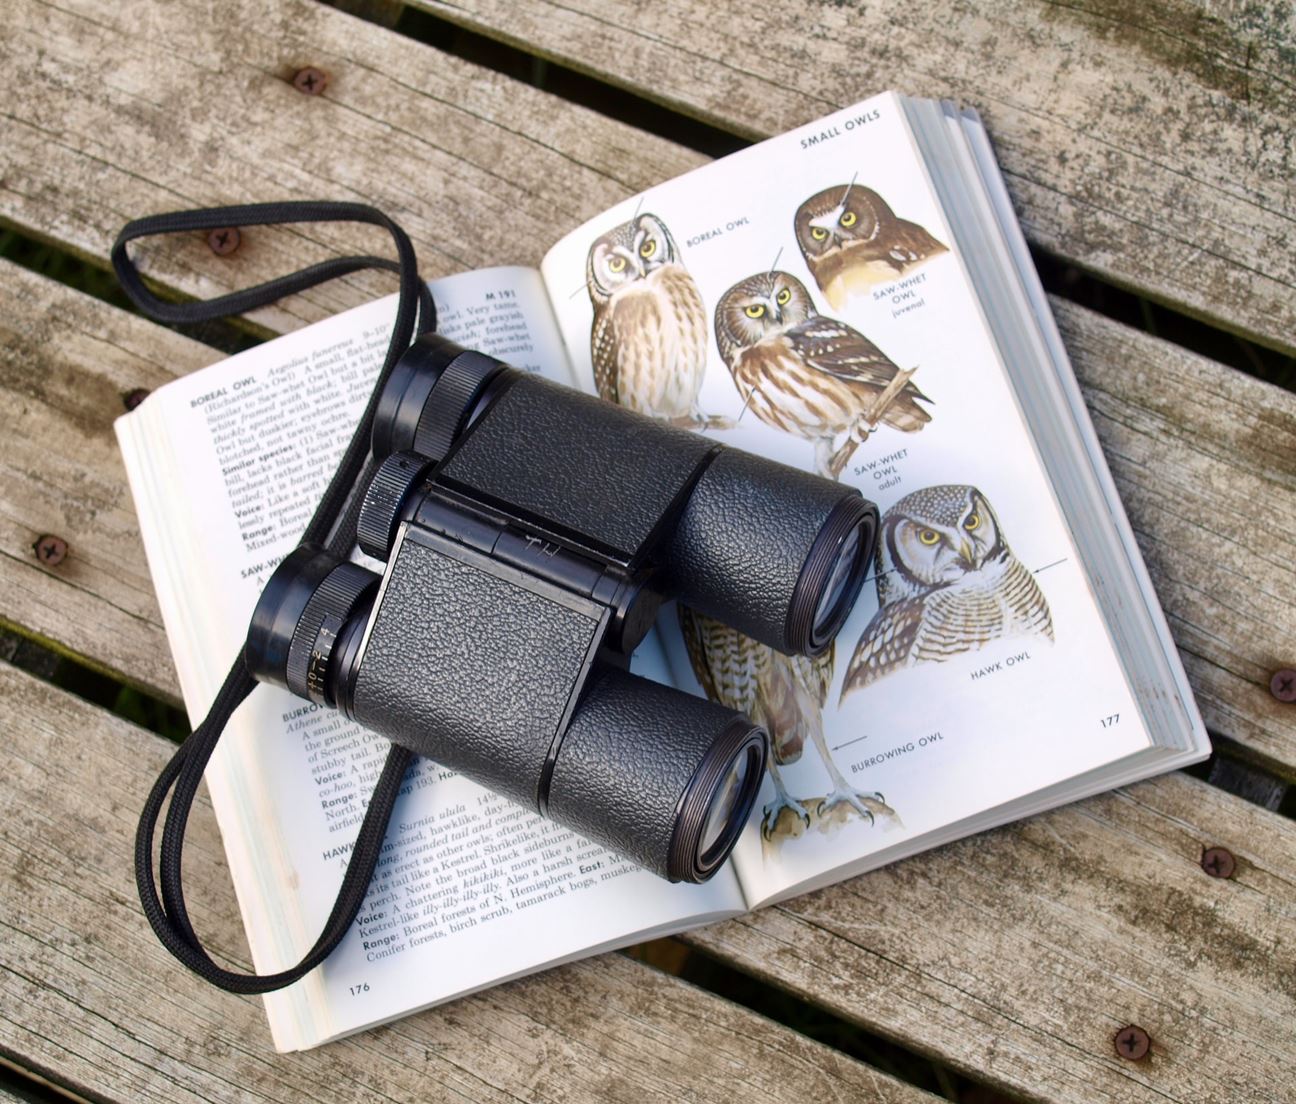 Bird watching soars with high-end cameras - CNET